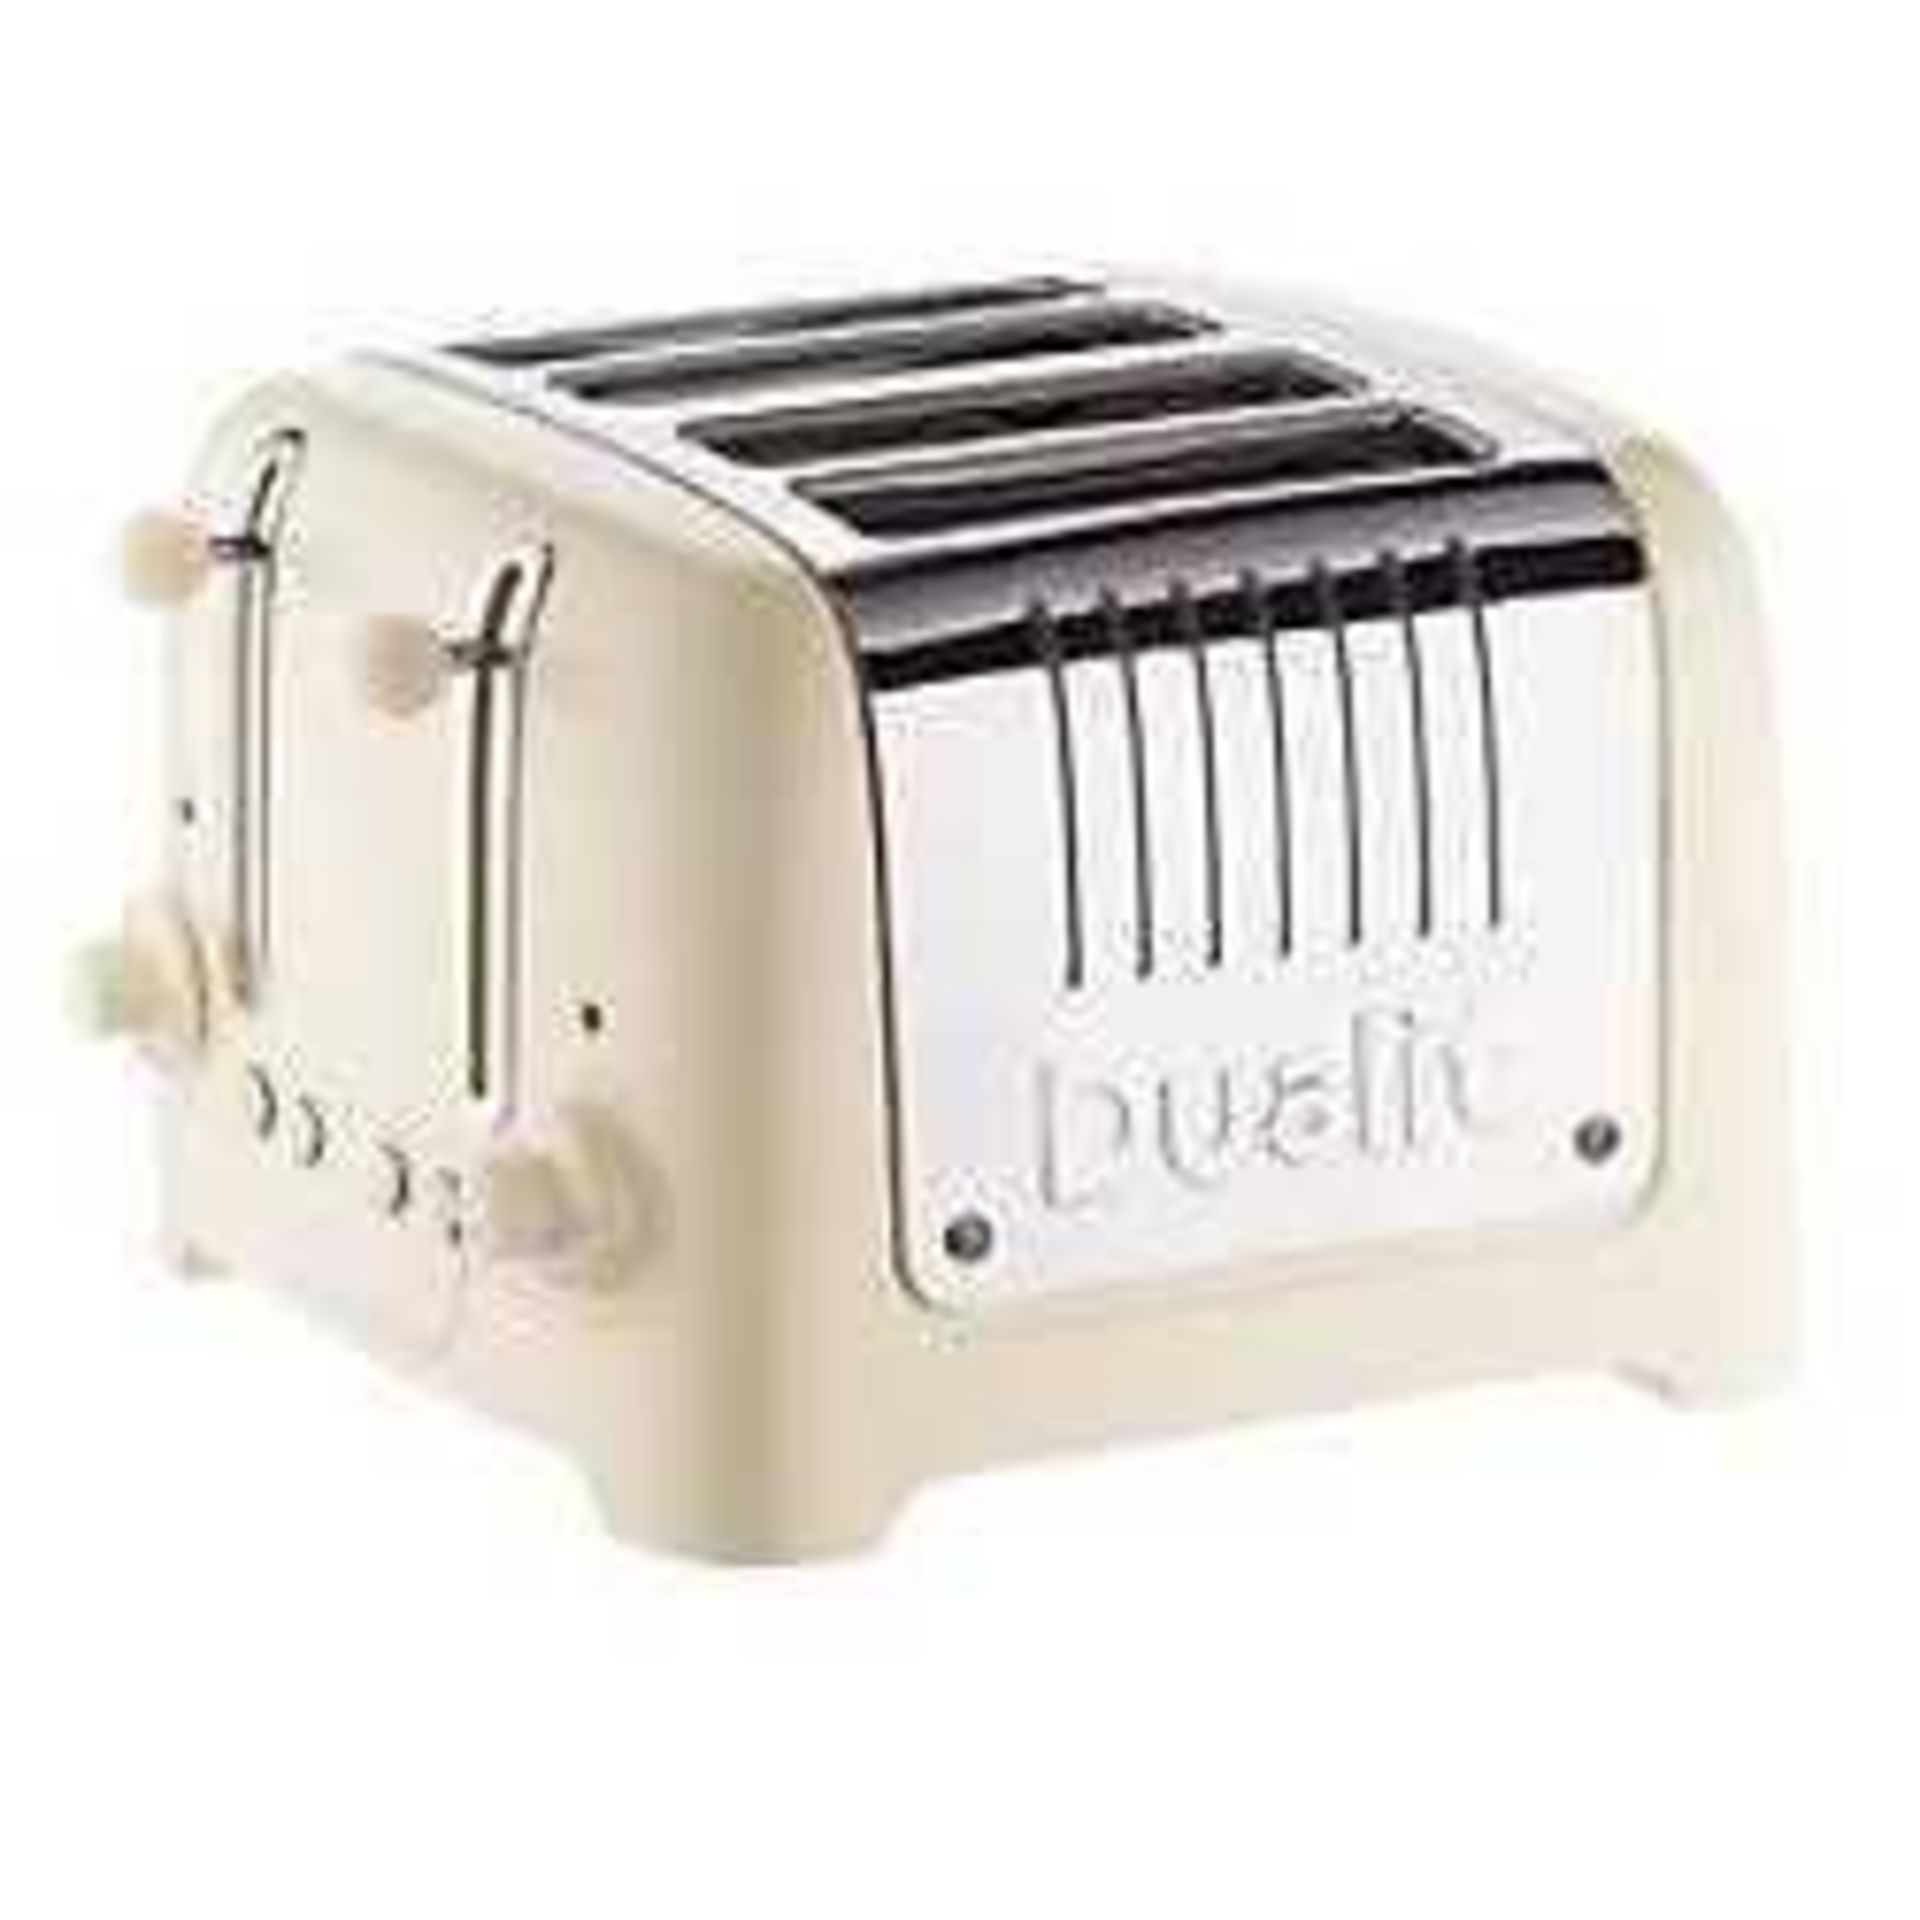 RRP £210, Lot To Contain X3 Items, X1 Dualit 1.5L Lite Jug Kettle, X1 Cream Dualit Toaster, X1 Dual